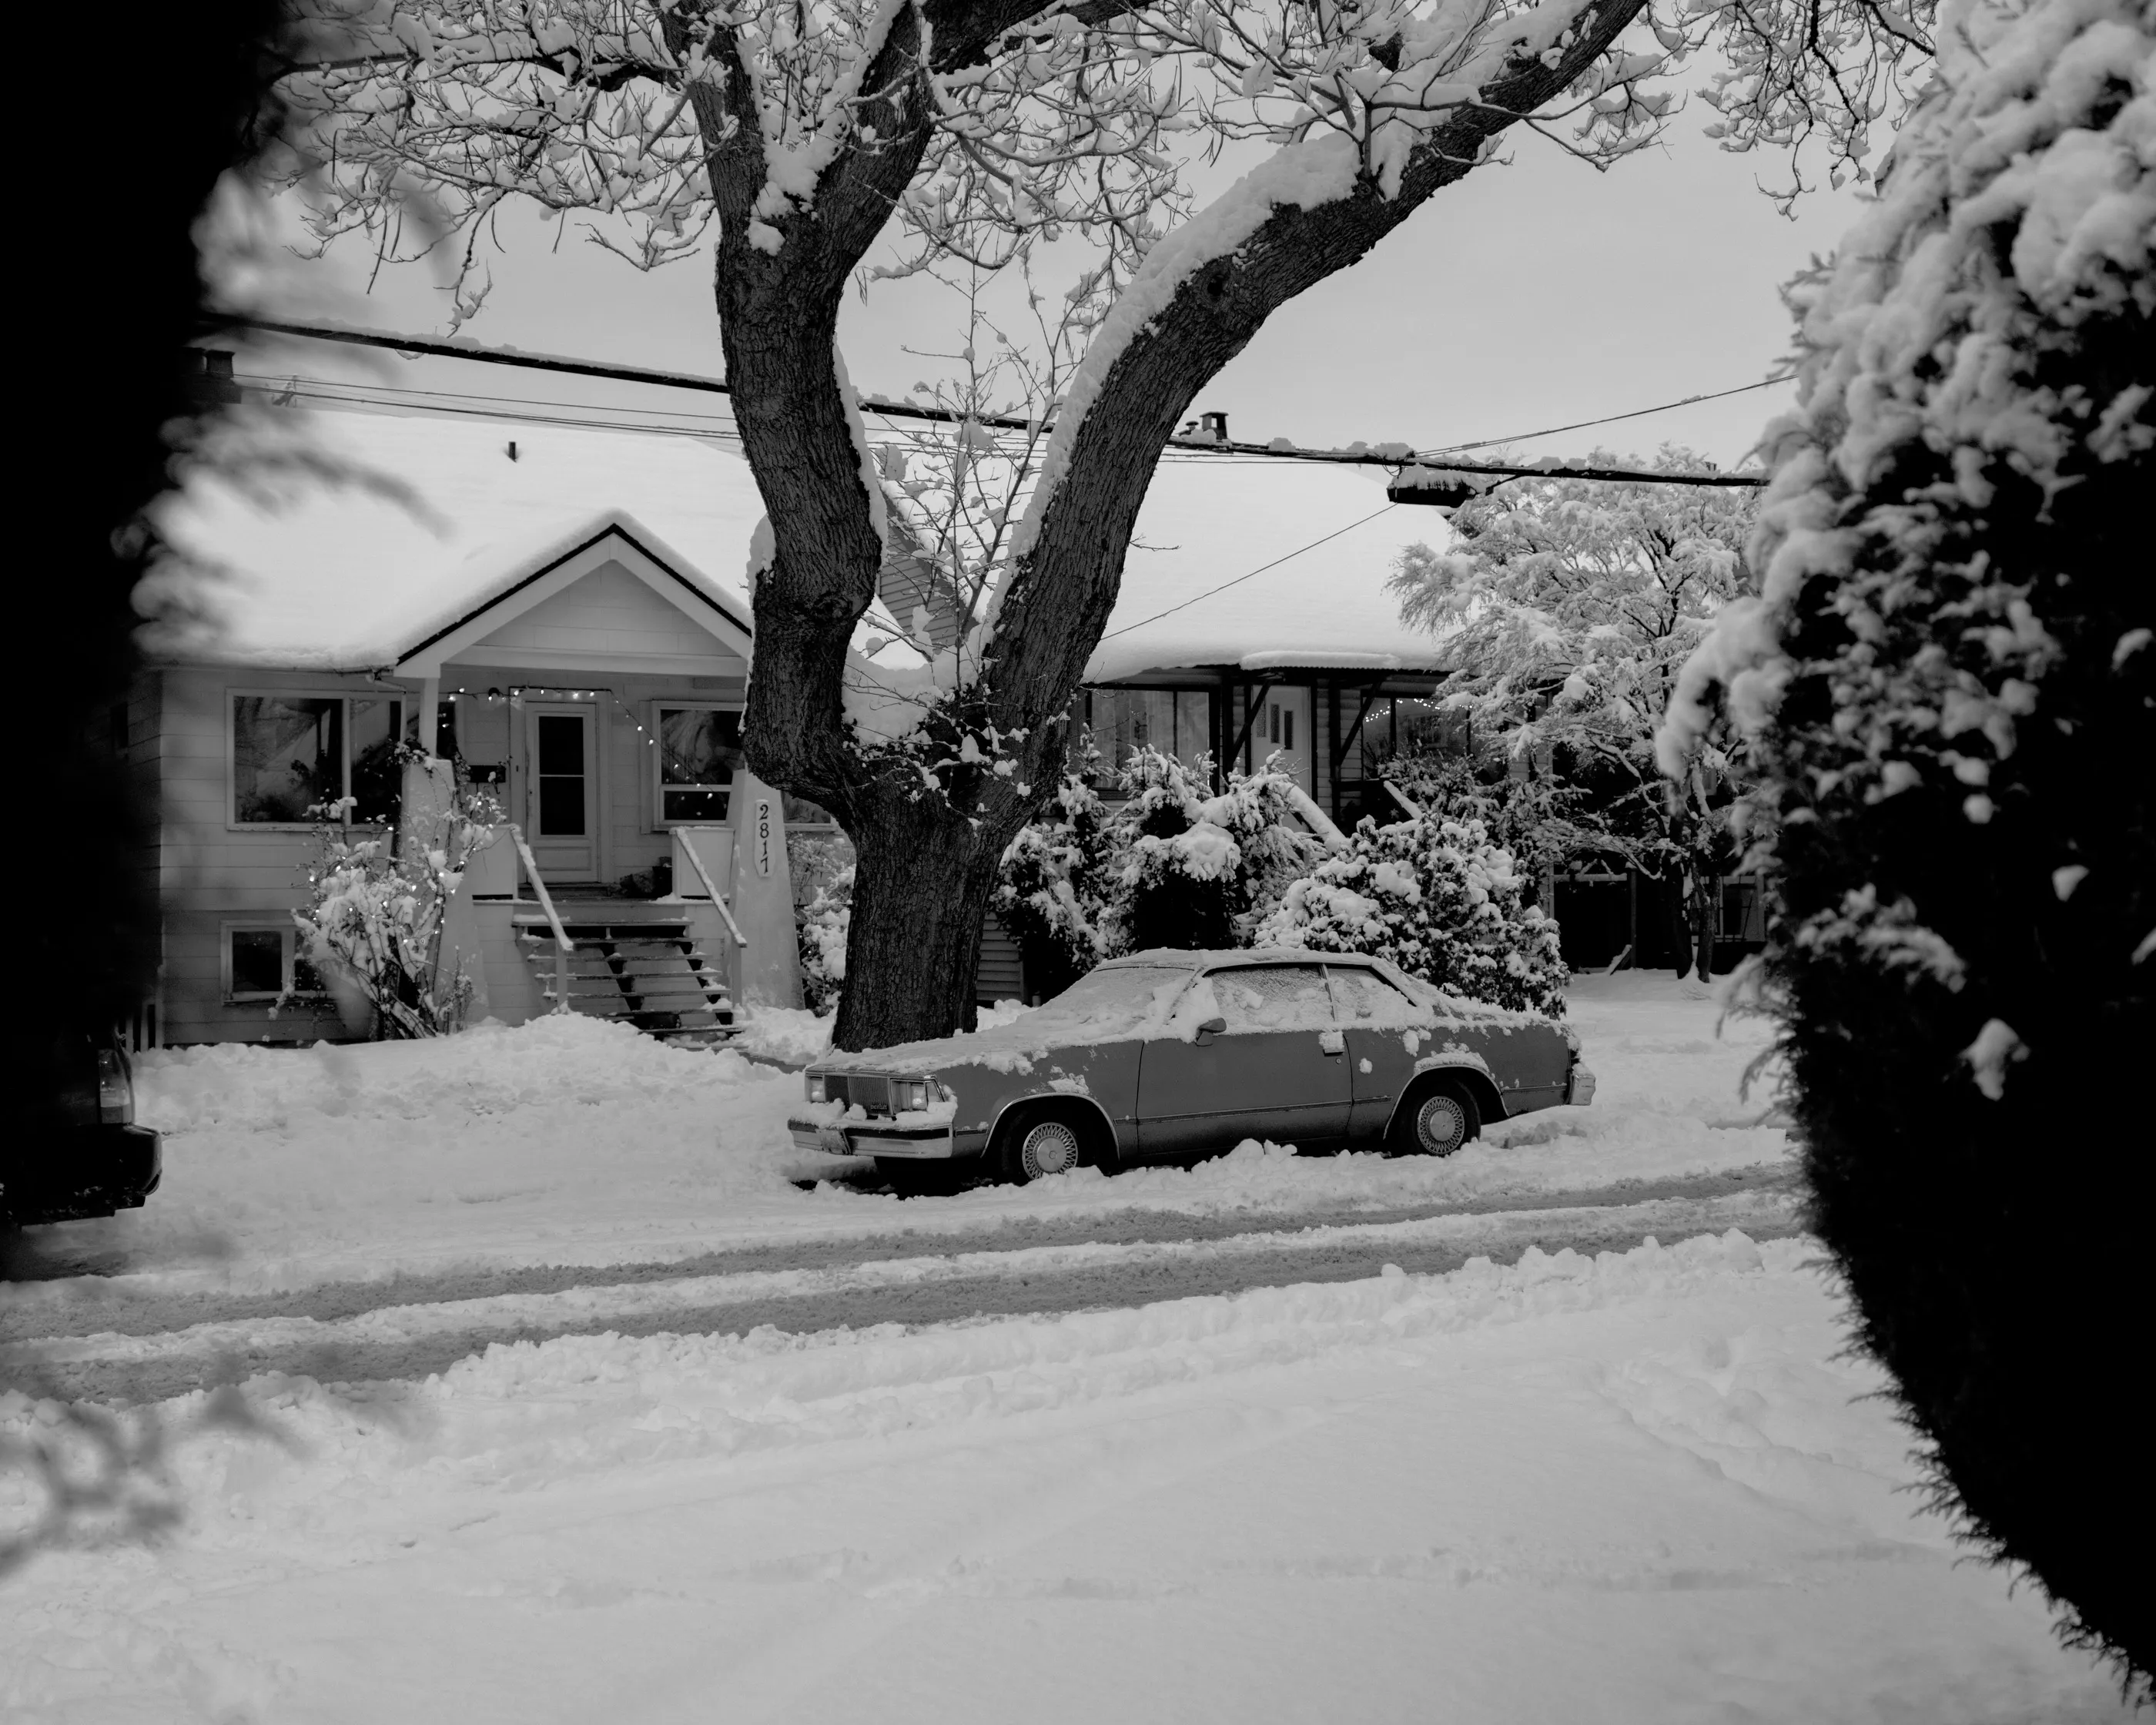 The snow in Vancouver